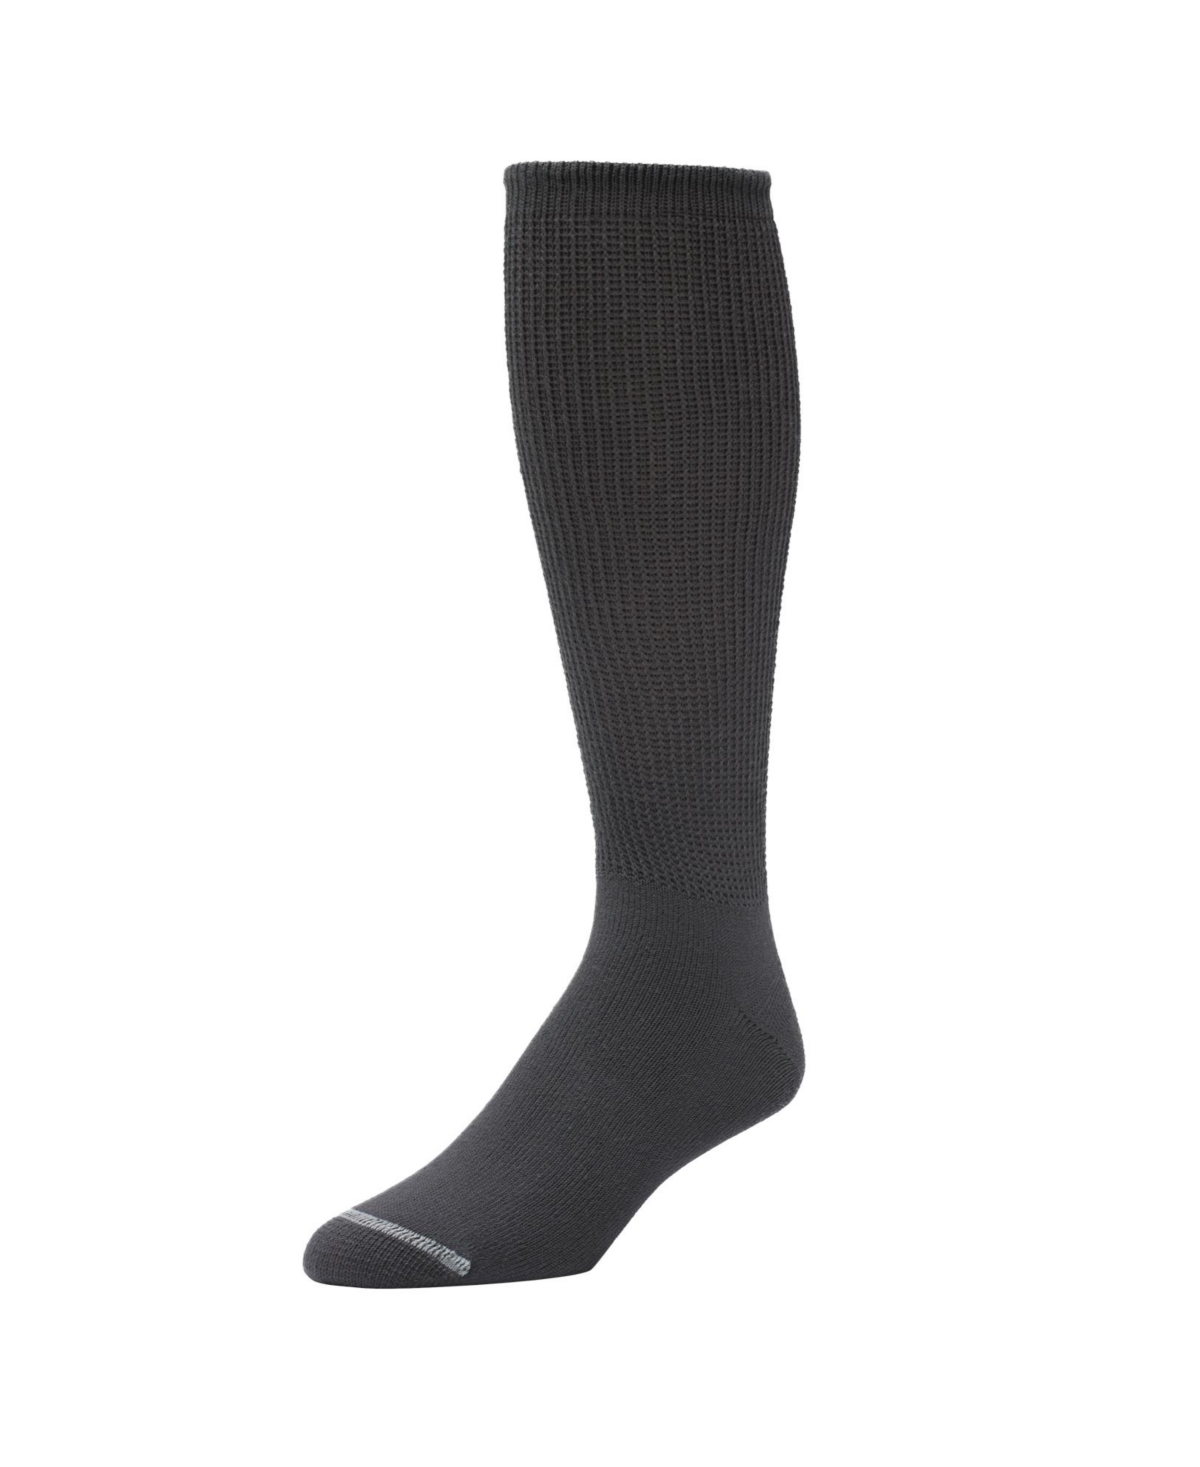 Big & Tall Diabetic Crew Socks With Extra Wide Footbed - Heather charcoal